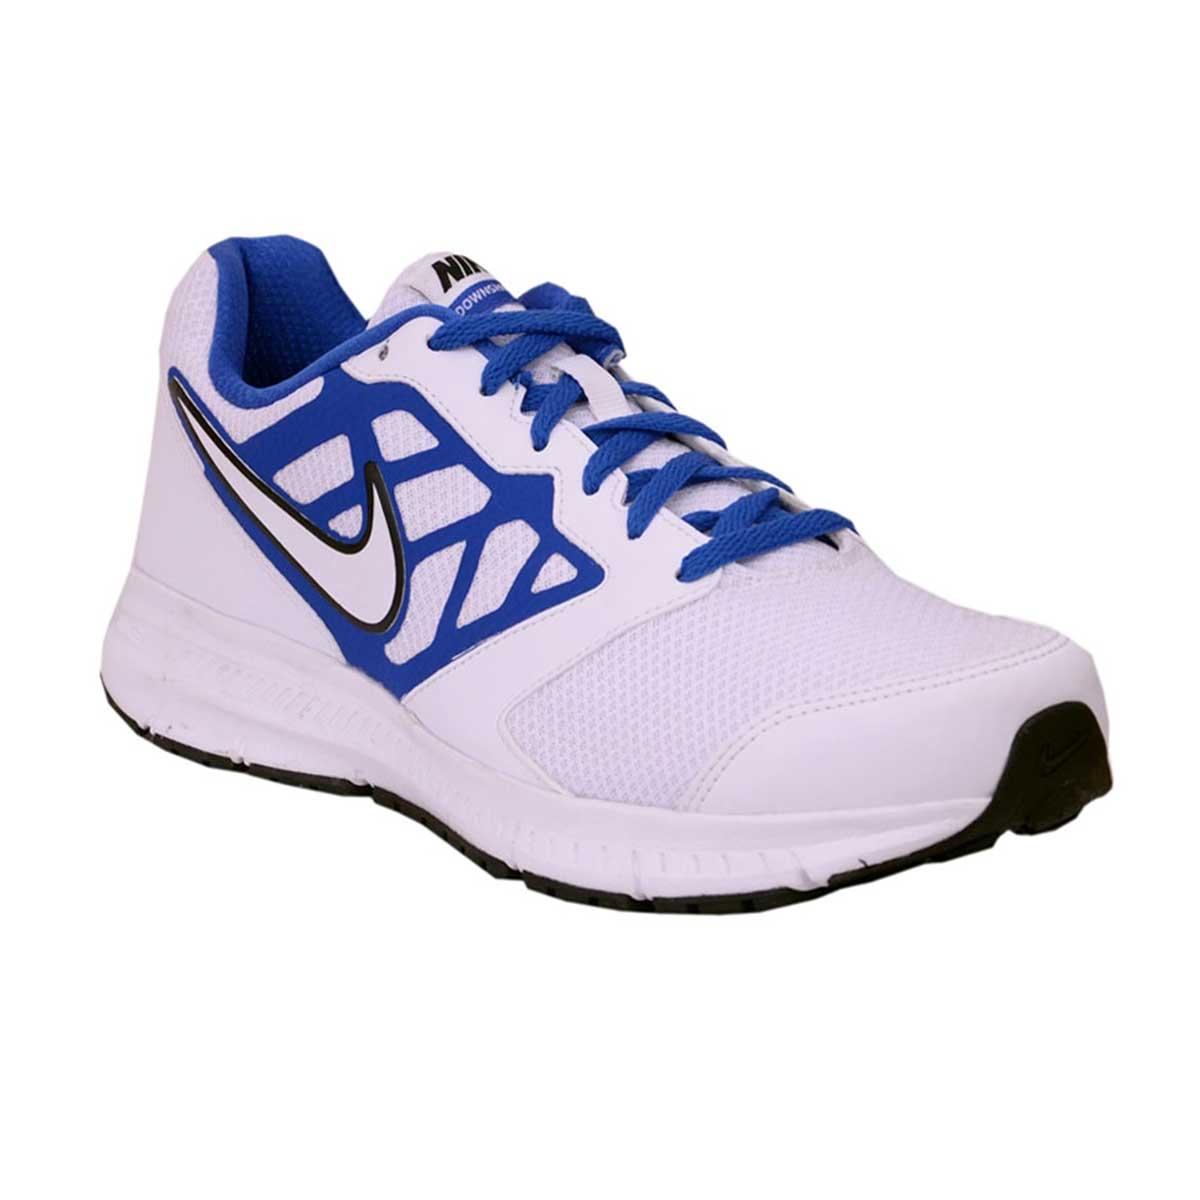 Nike Downshifter 6 Running Shoes (White/Blue) Online India